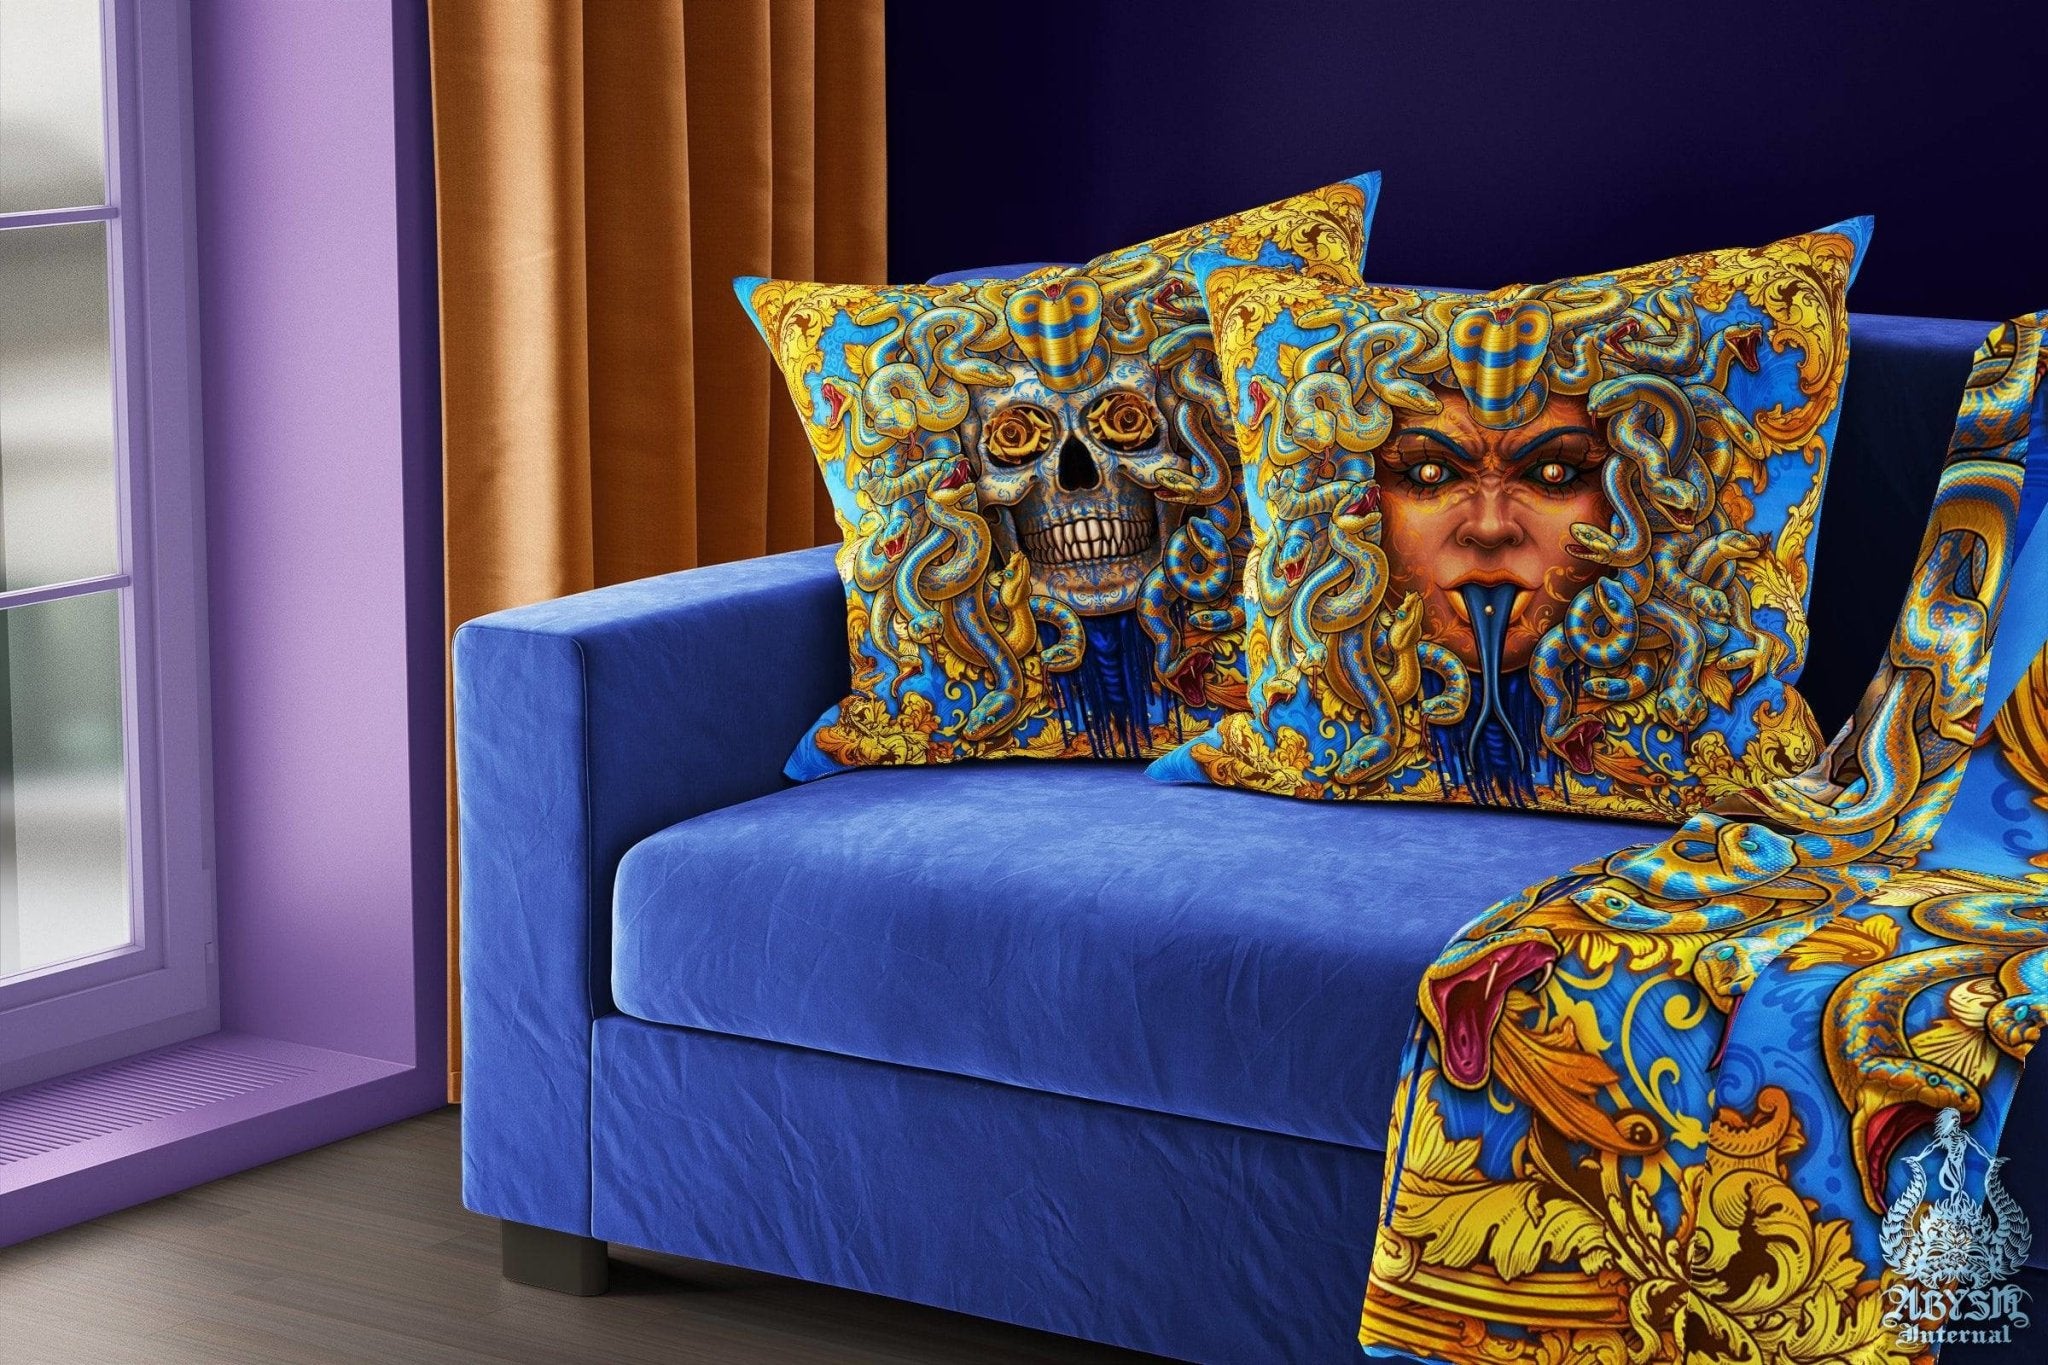 Skull Throw Pillow, Decorative Accent Cushion, Medusa, Game Room Decor, Macabre Art, Funky and Eclectic Home - Cyan & Gold Snakes - Abysm Internal